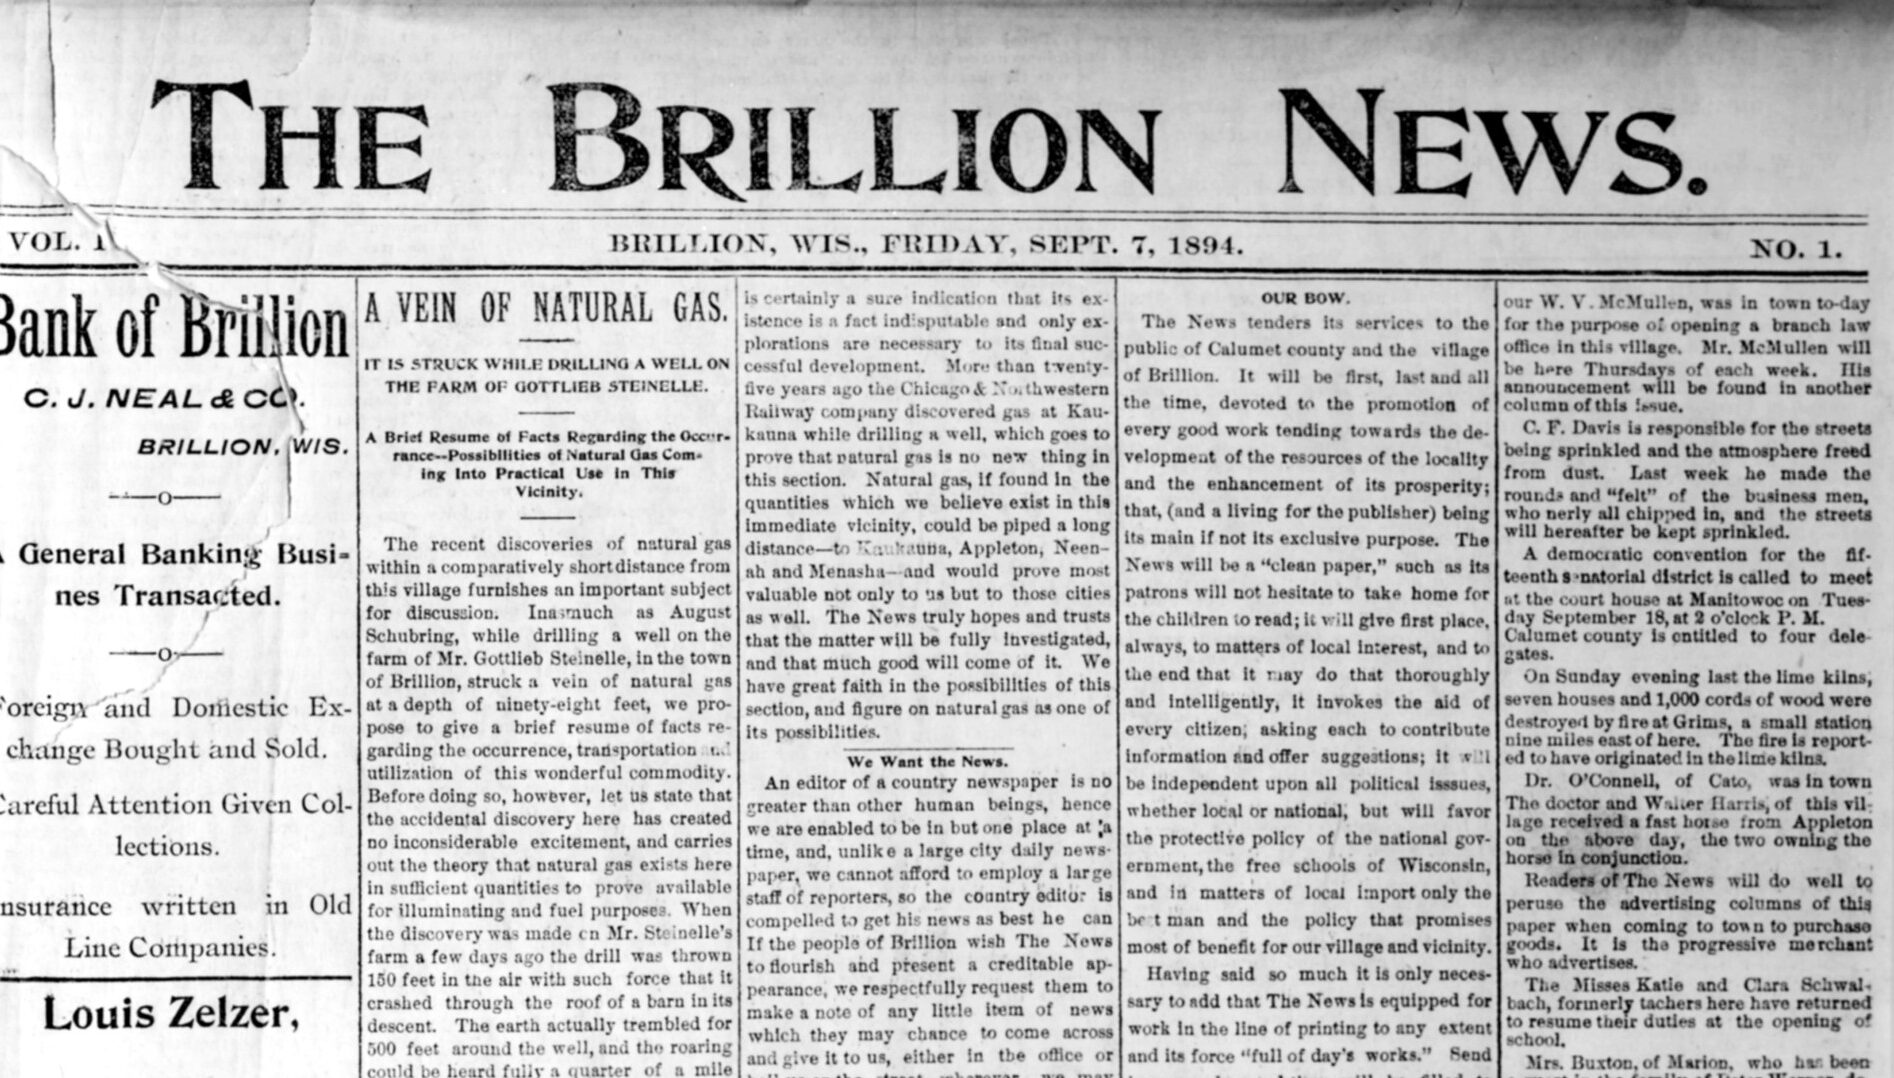 The first issue of The Brillion News published on Friday, September 7, 1894